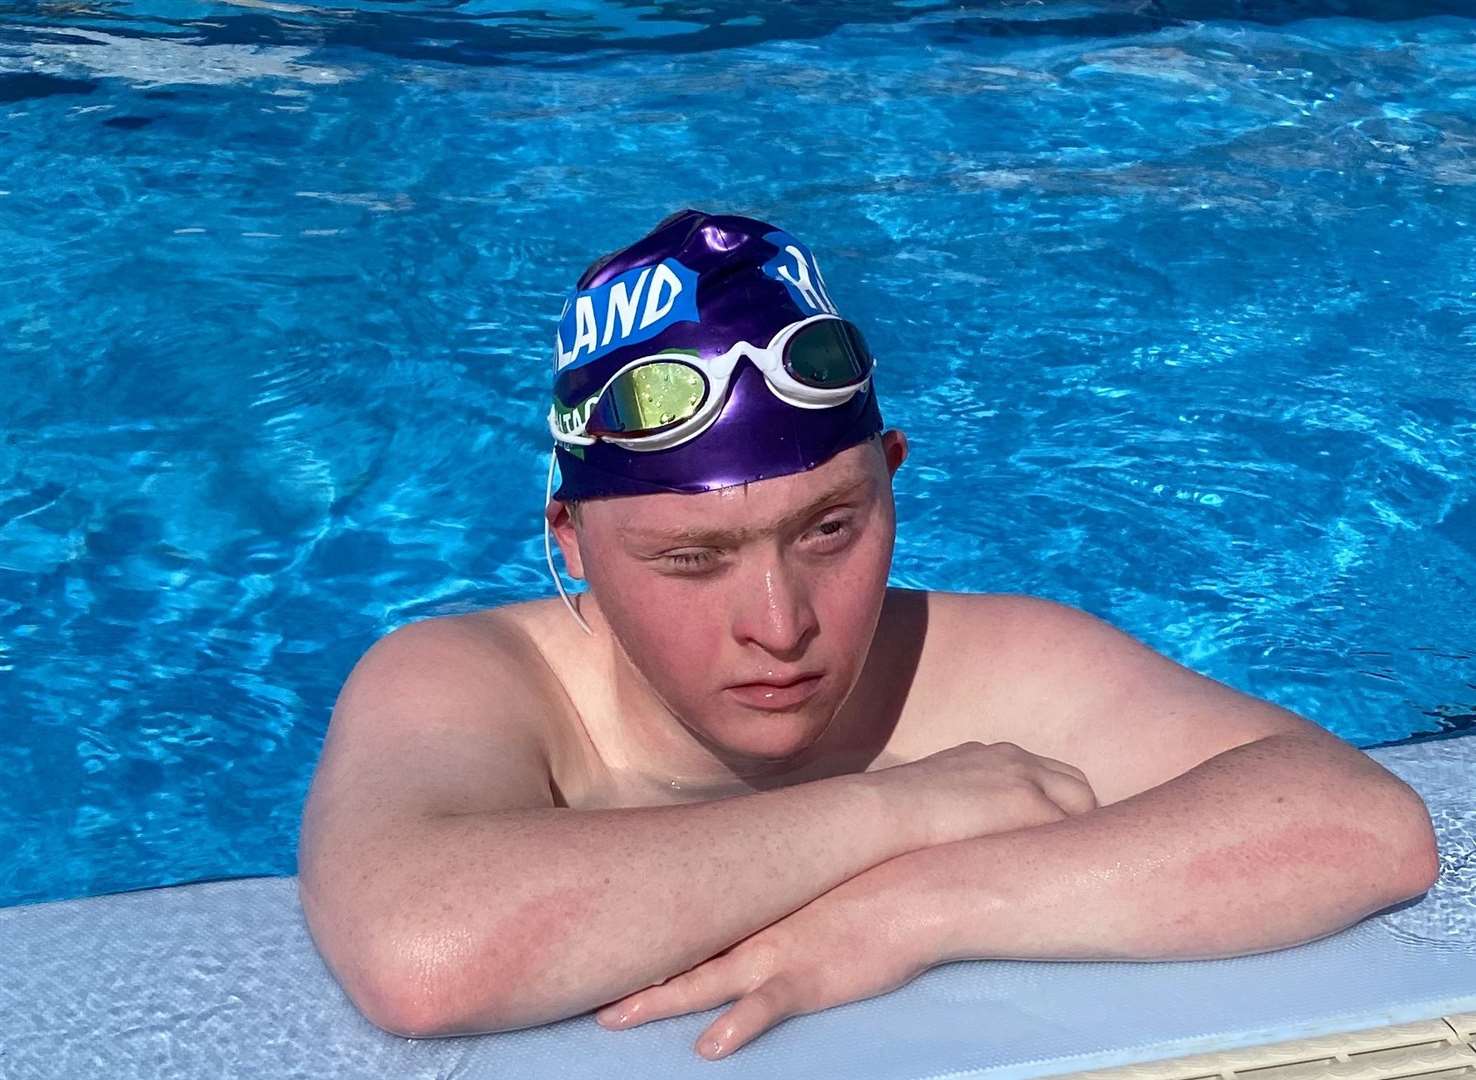 Matthew is aiming to take part in the DS GB swim team